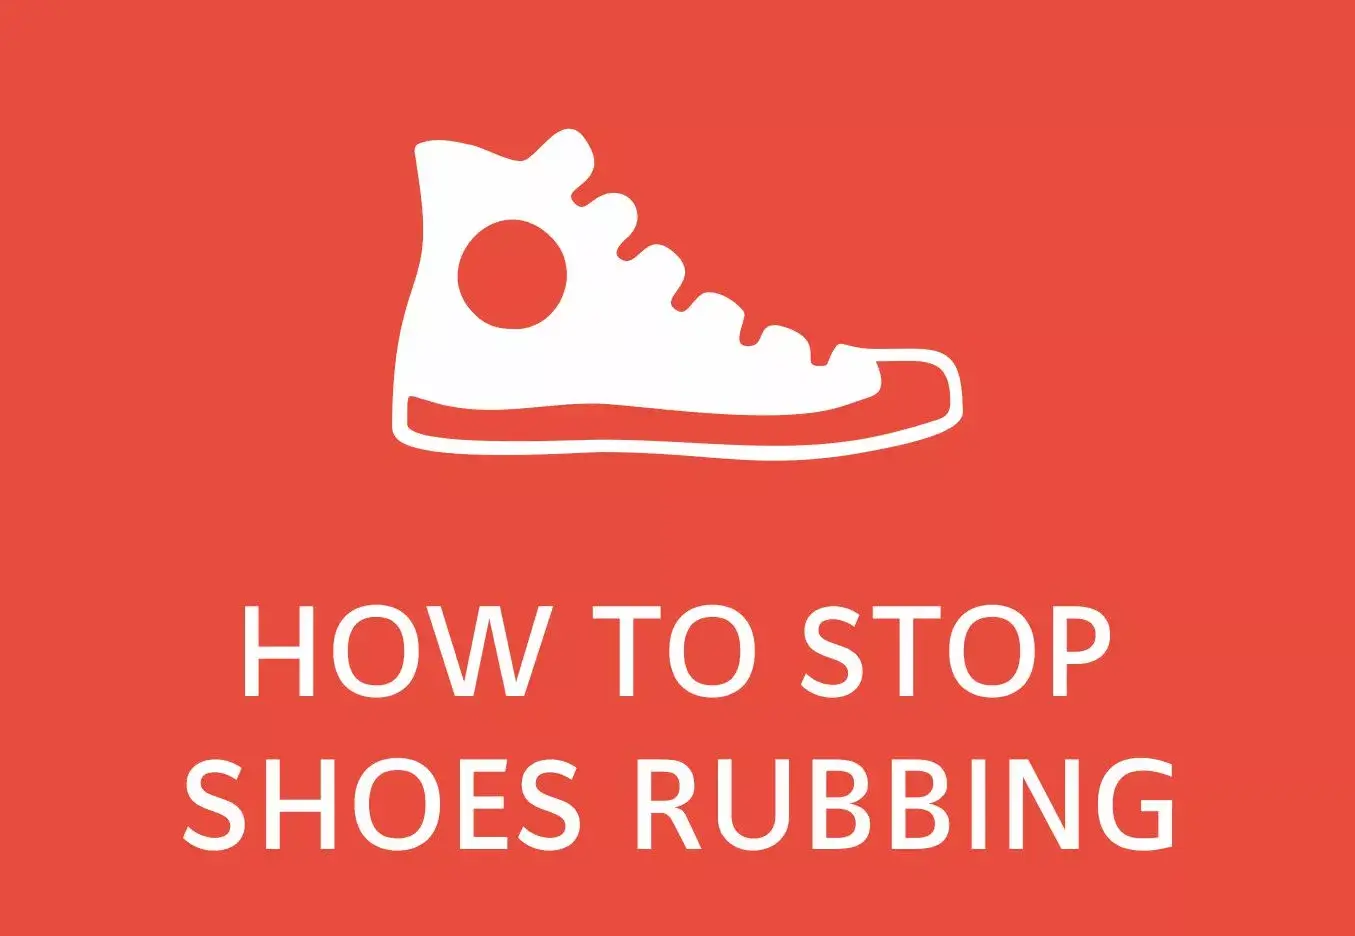 How to stop shoes rubbing